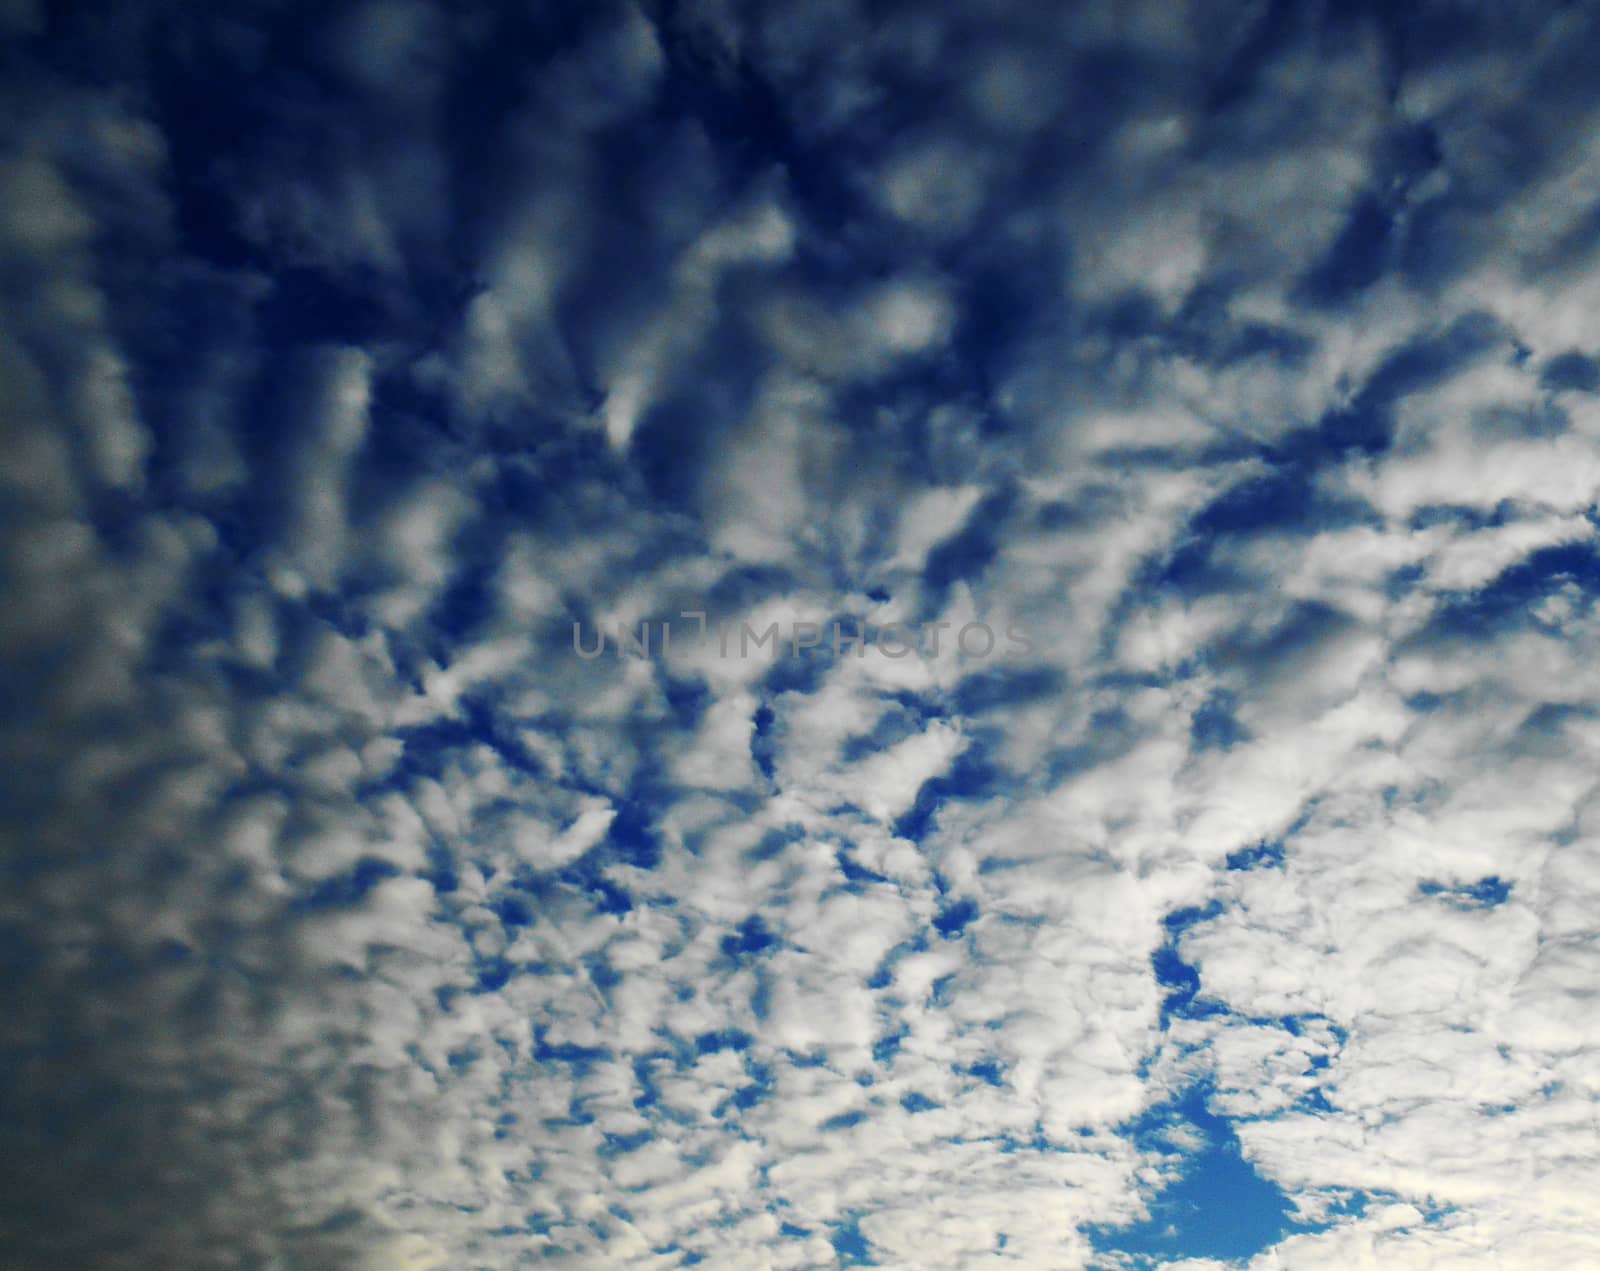 A view of a cloudscape. 

Picture taken on November 16, 2014.